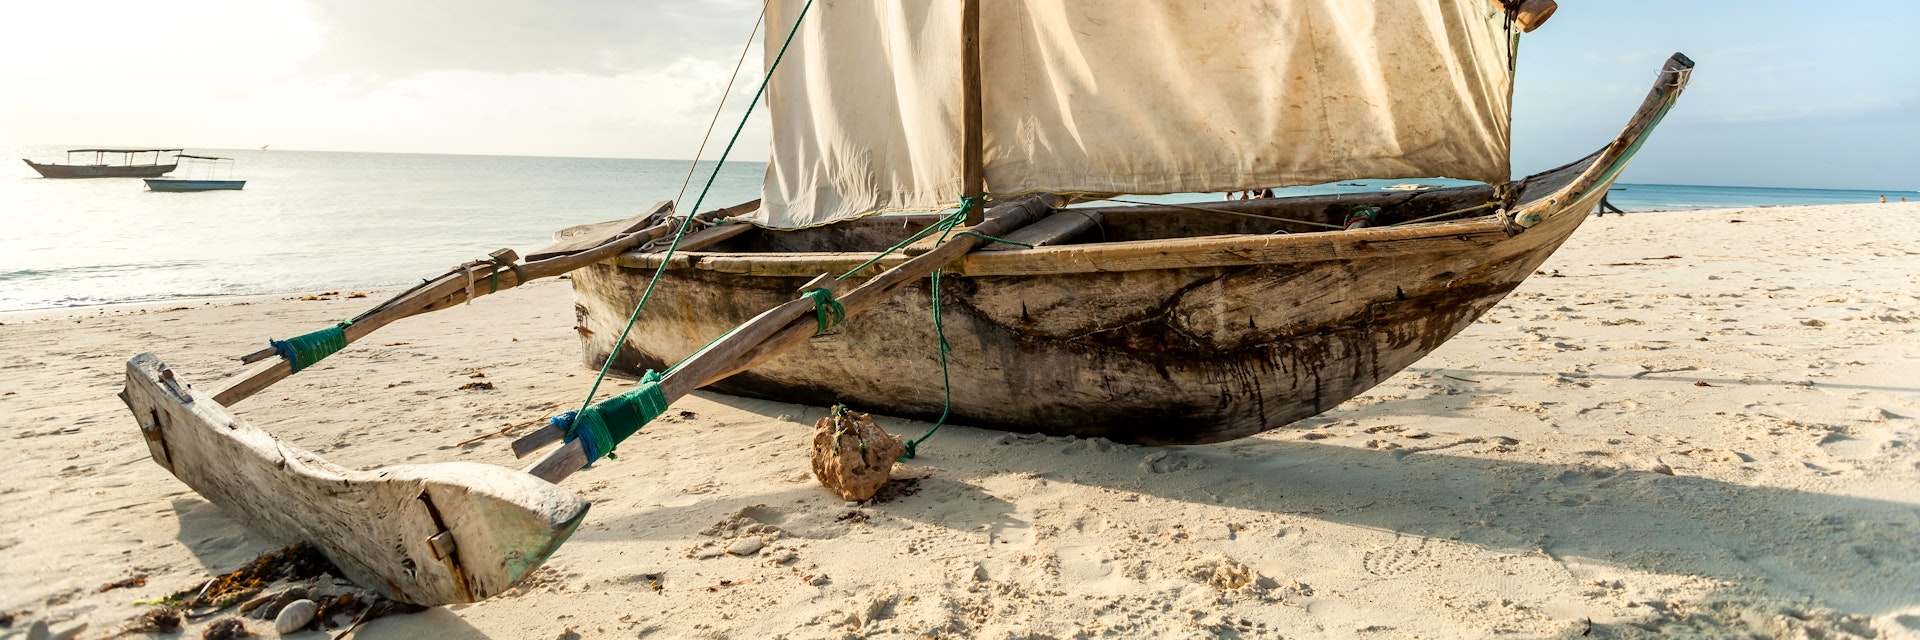 A Dhow boat on the beach. Sailing boat on the shore.